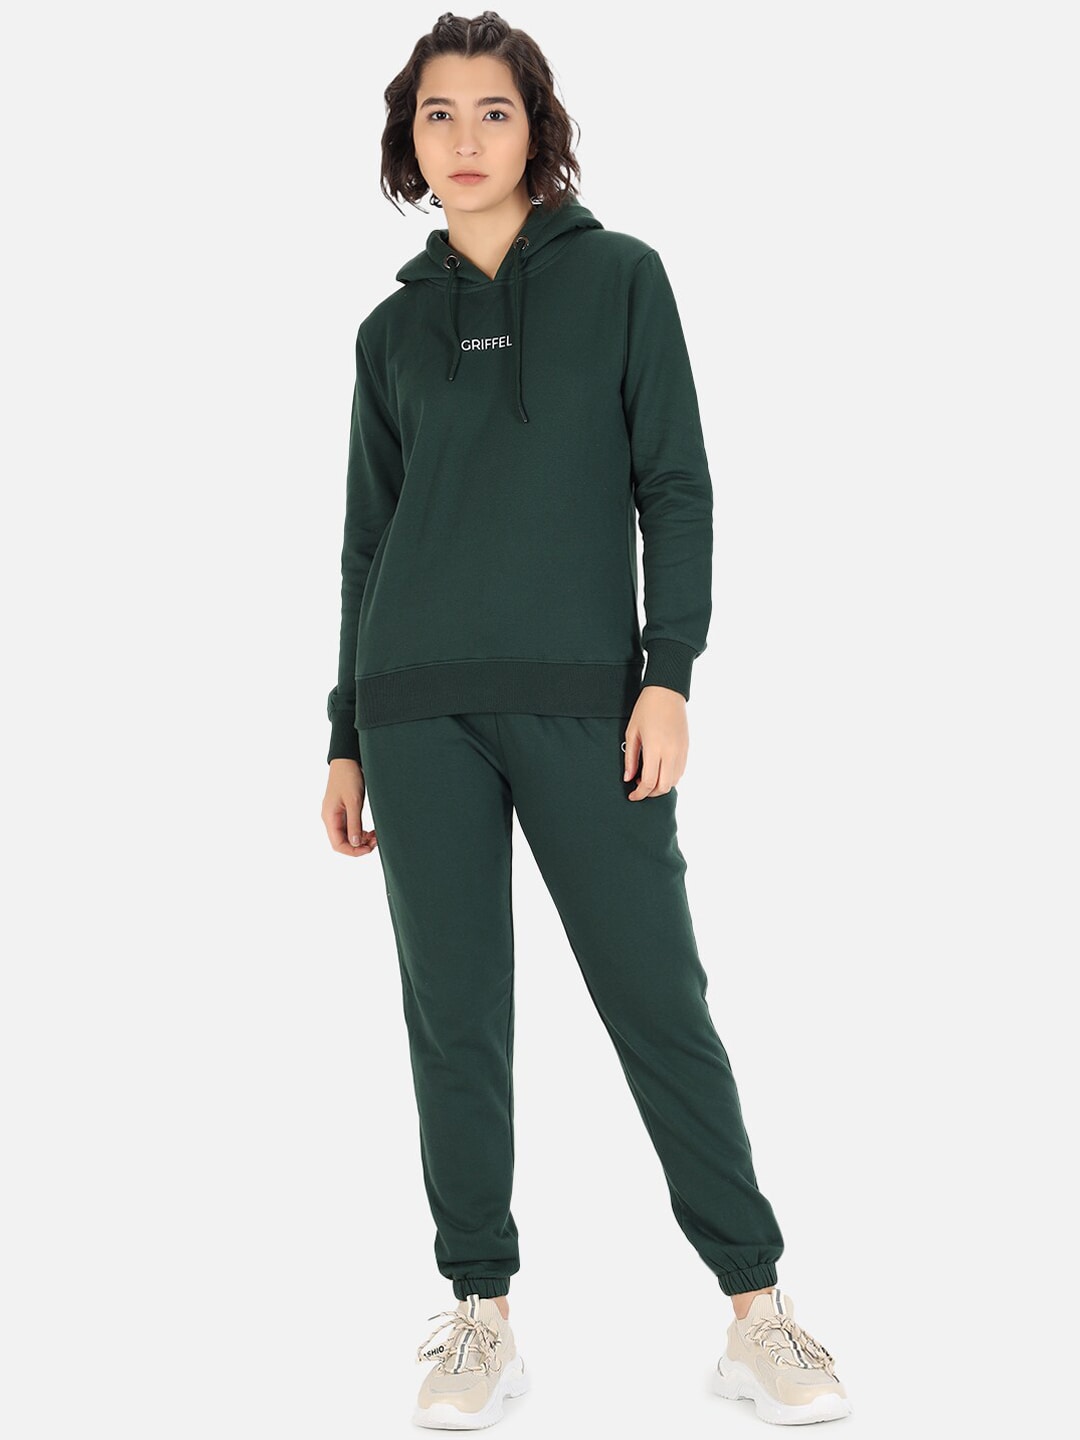 GRIFFEL Women Green Solid Tracksuits Price in India